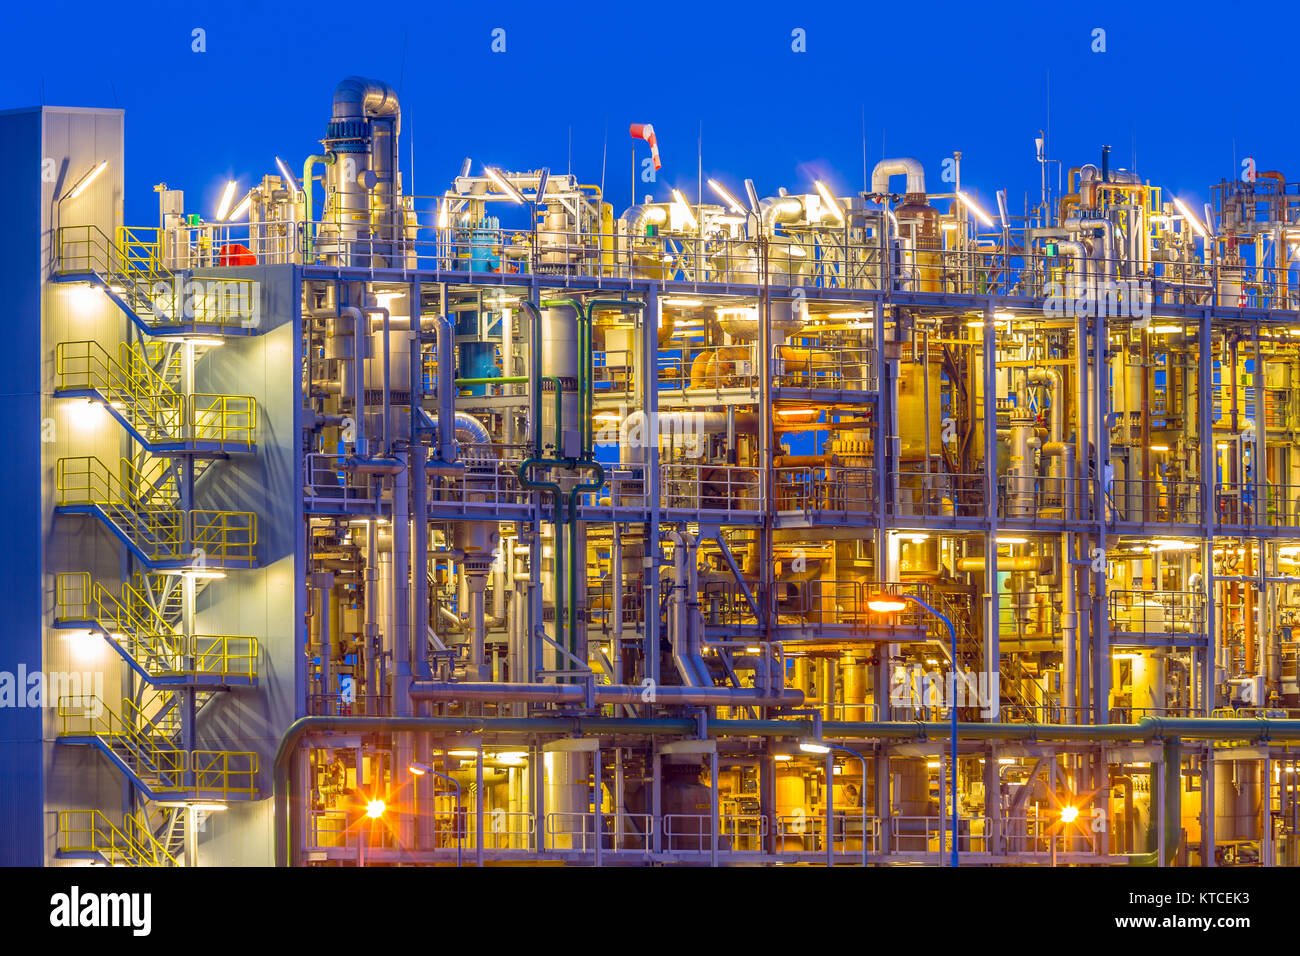 Overview of Heavy chemical plant framework at sunset in an industrial factory area Stock Photo